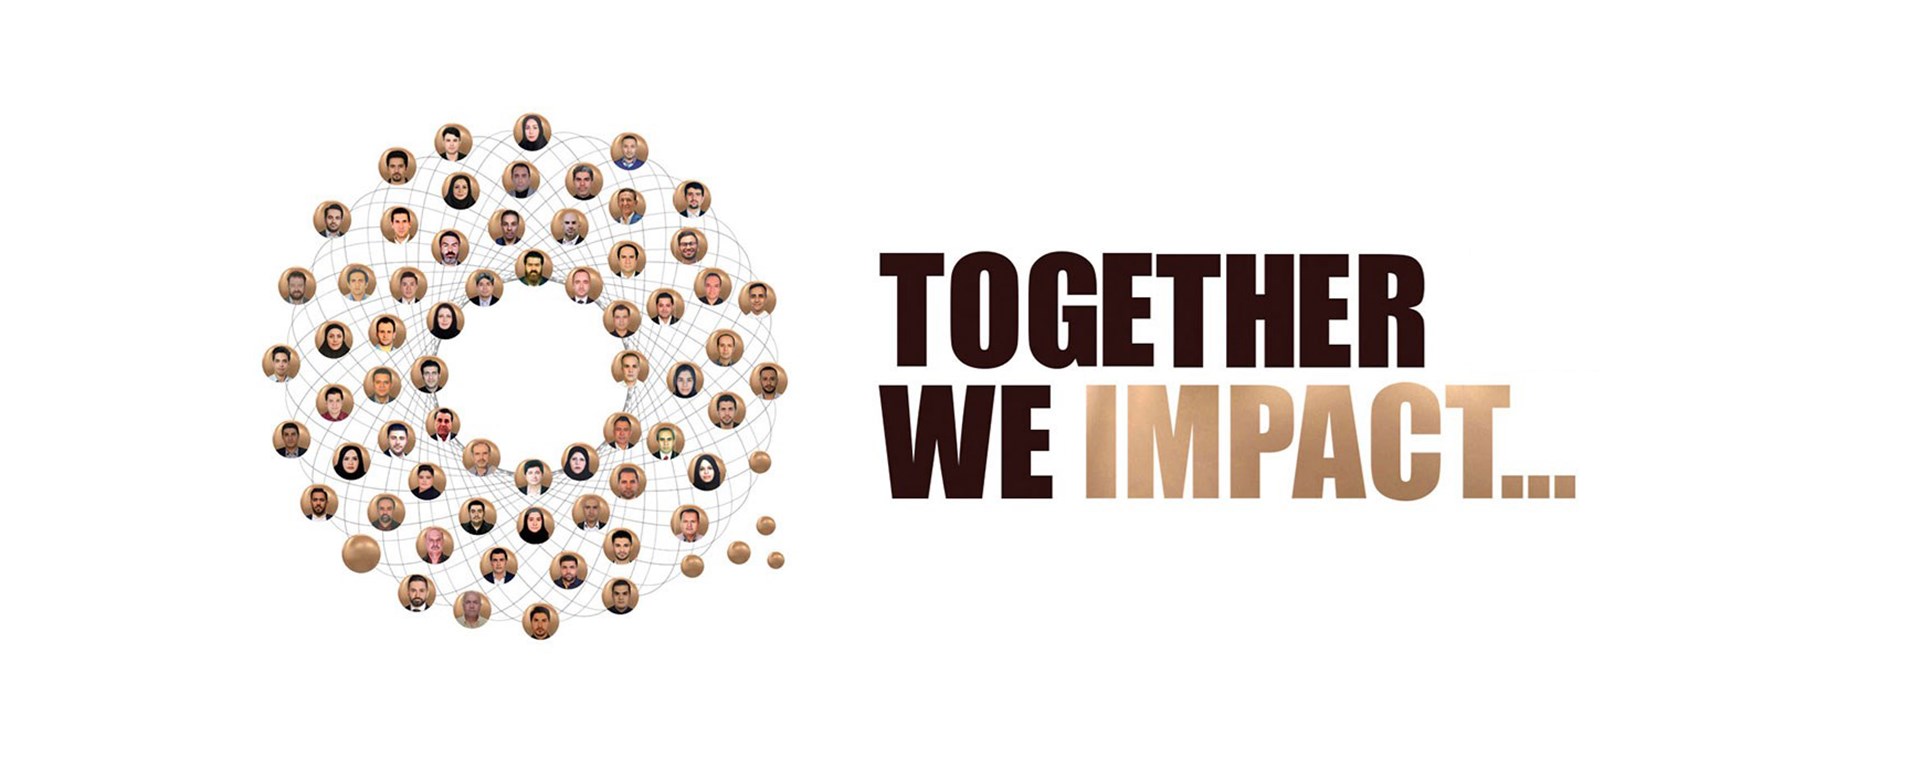 Together we impact